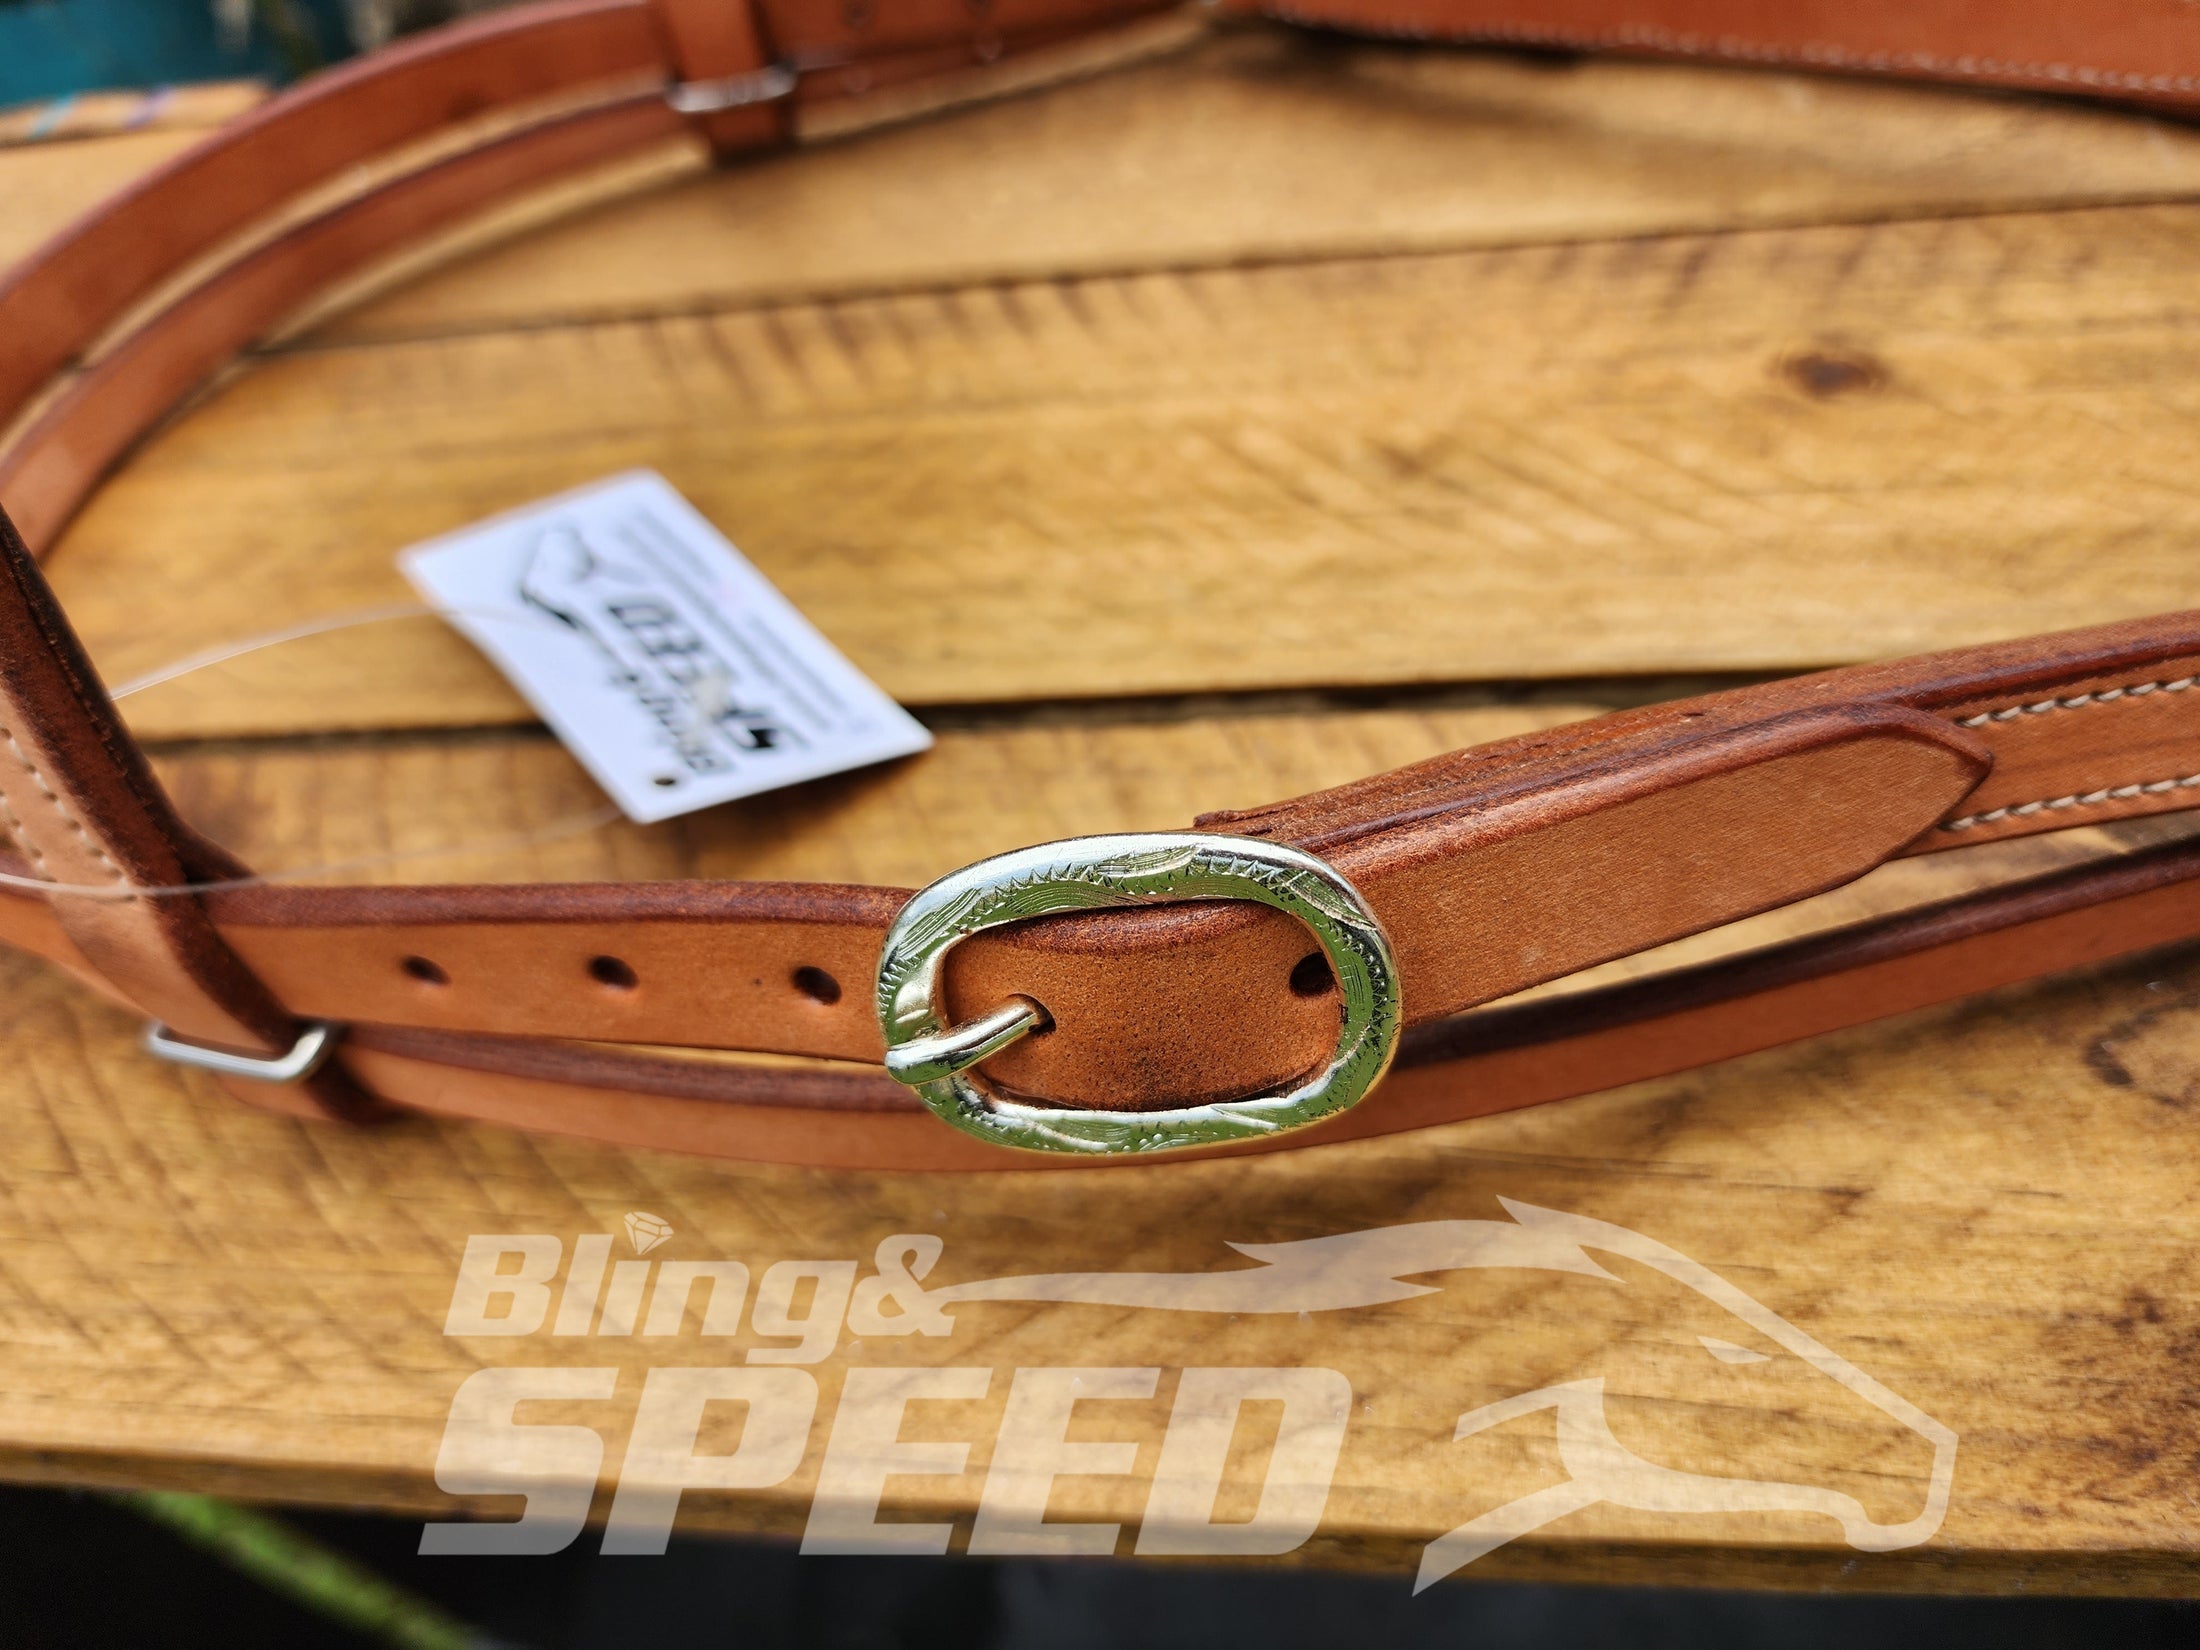 Bling & Speed Headstall with Snap Bit Ends - Light Oil (7956253278446)